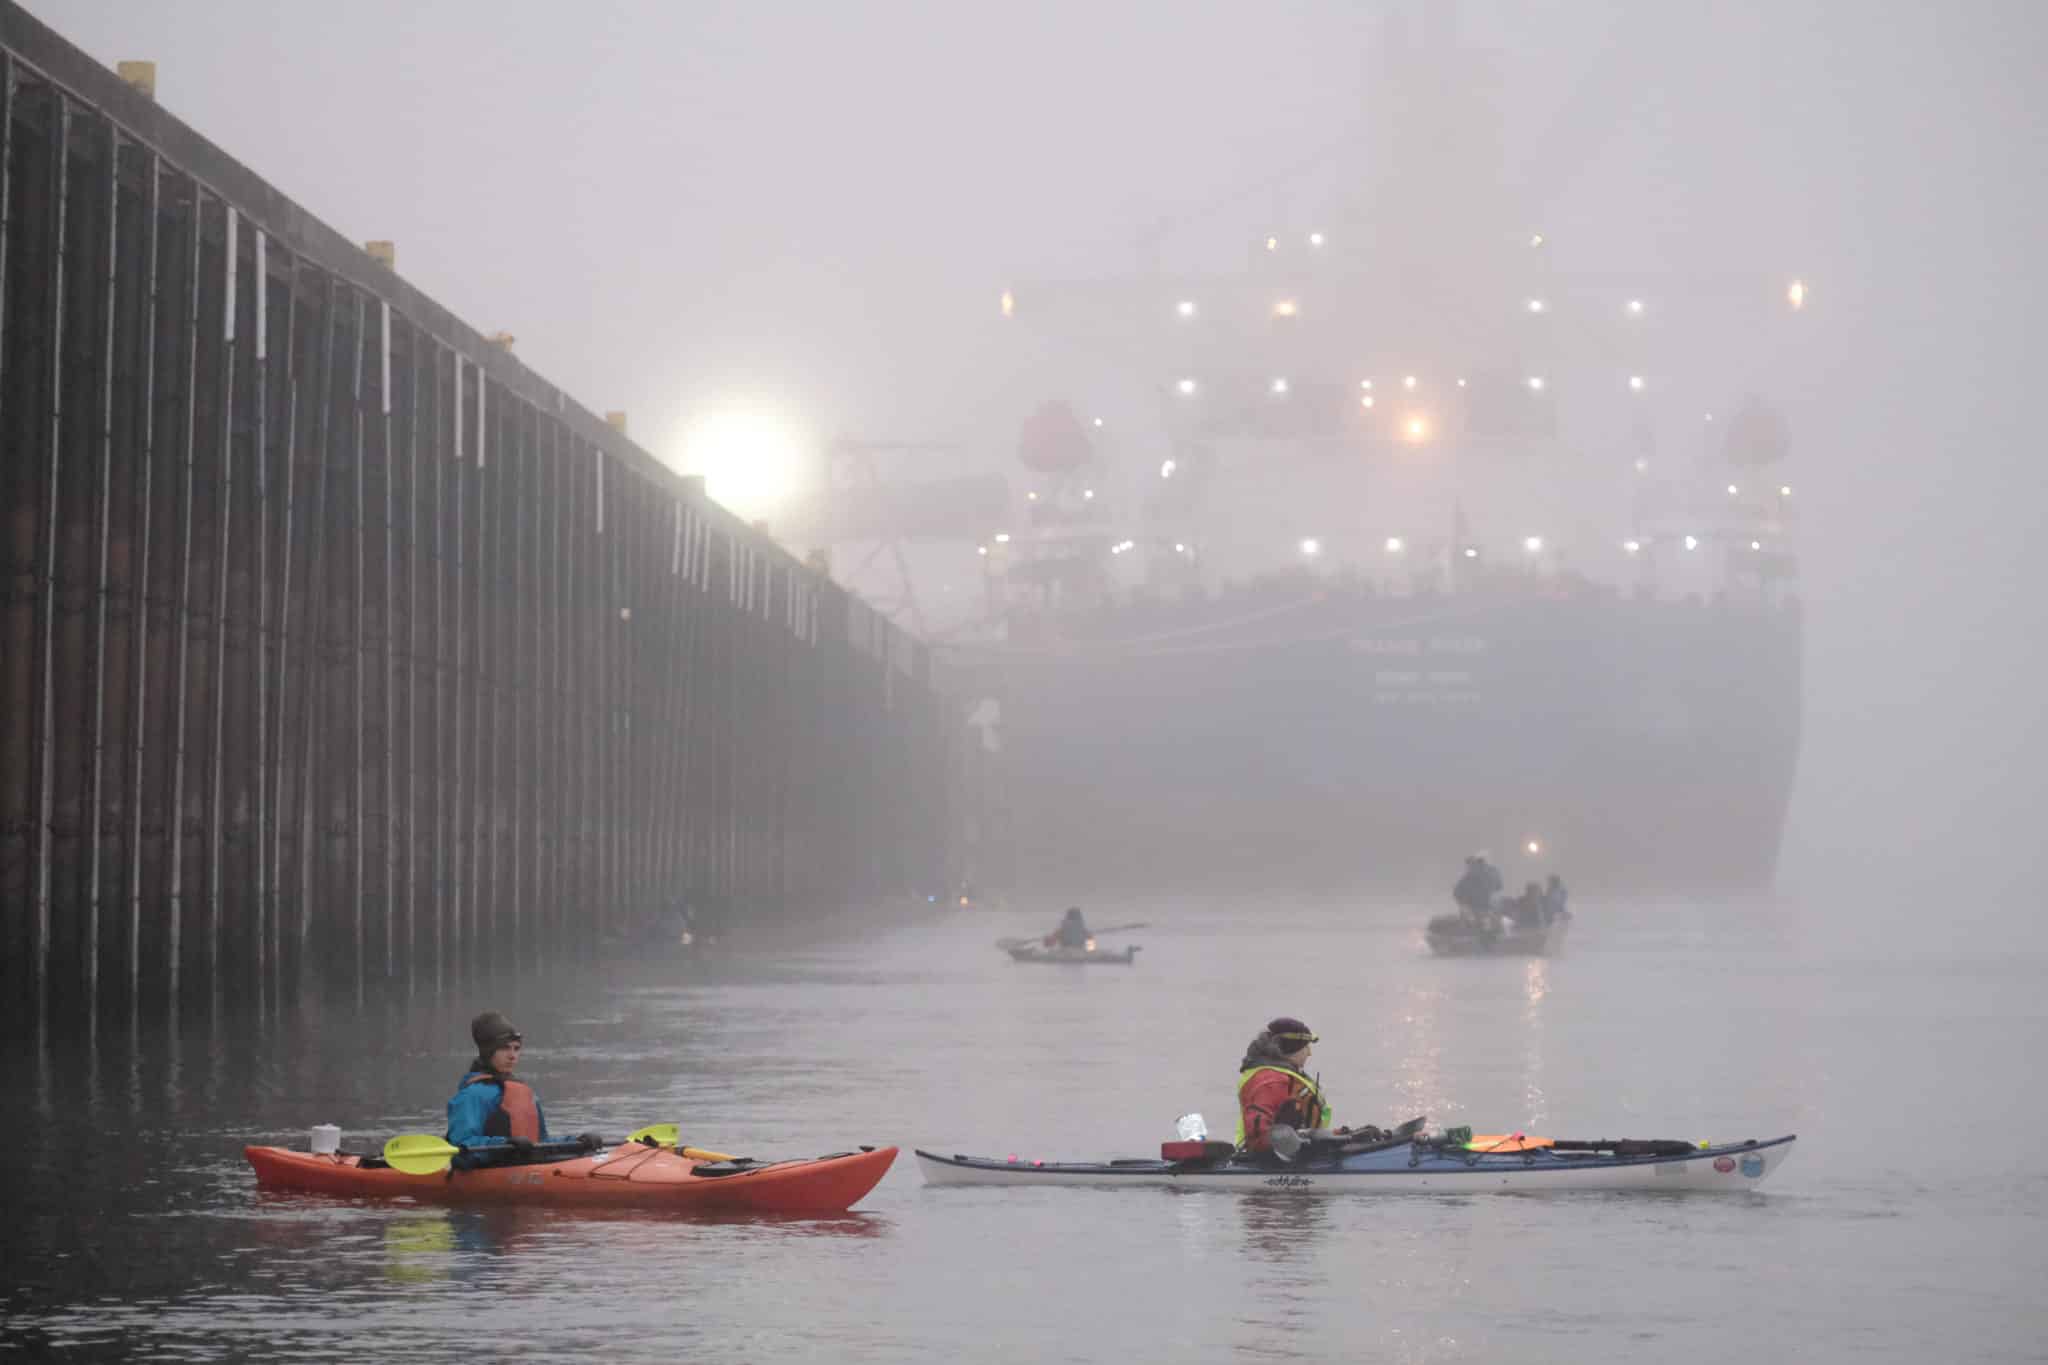 Activists in multicolored kayaks blockade a large barge--a pier is on the left side, and the sun is visible on the horizon through the gray mist.